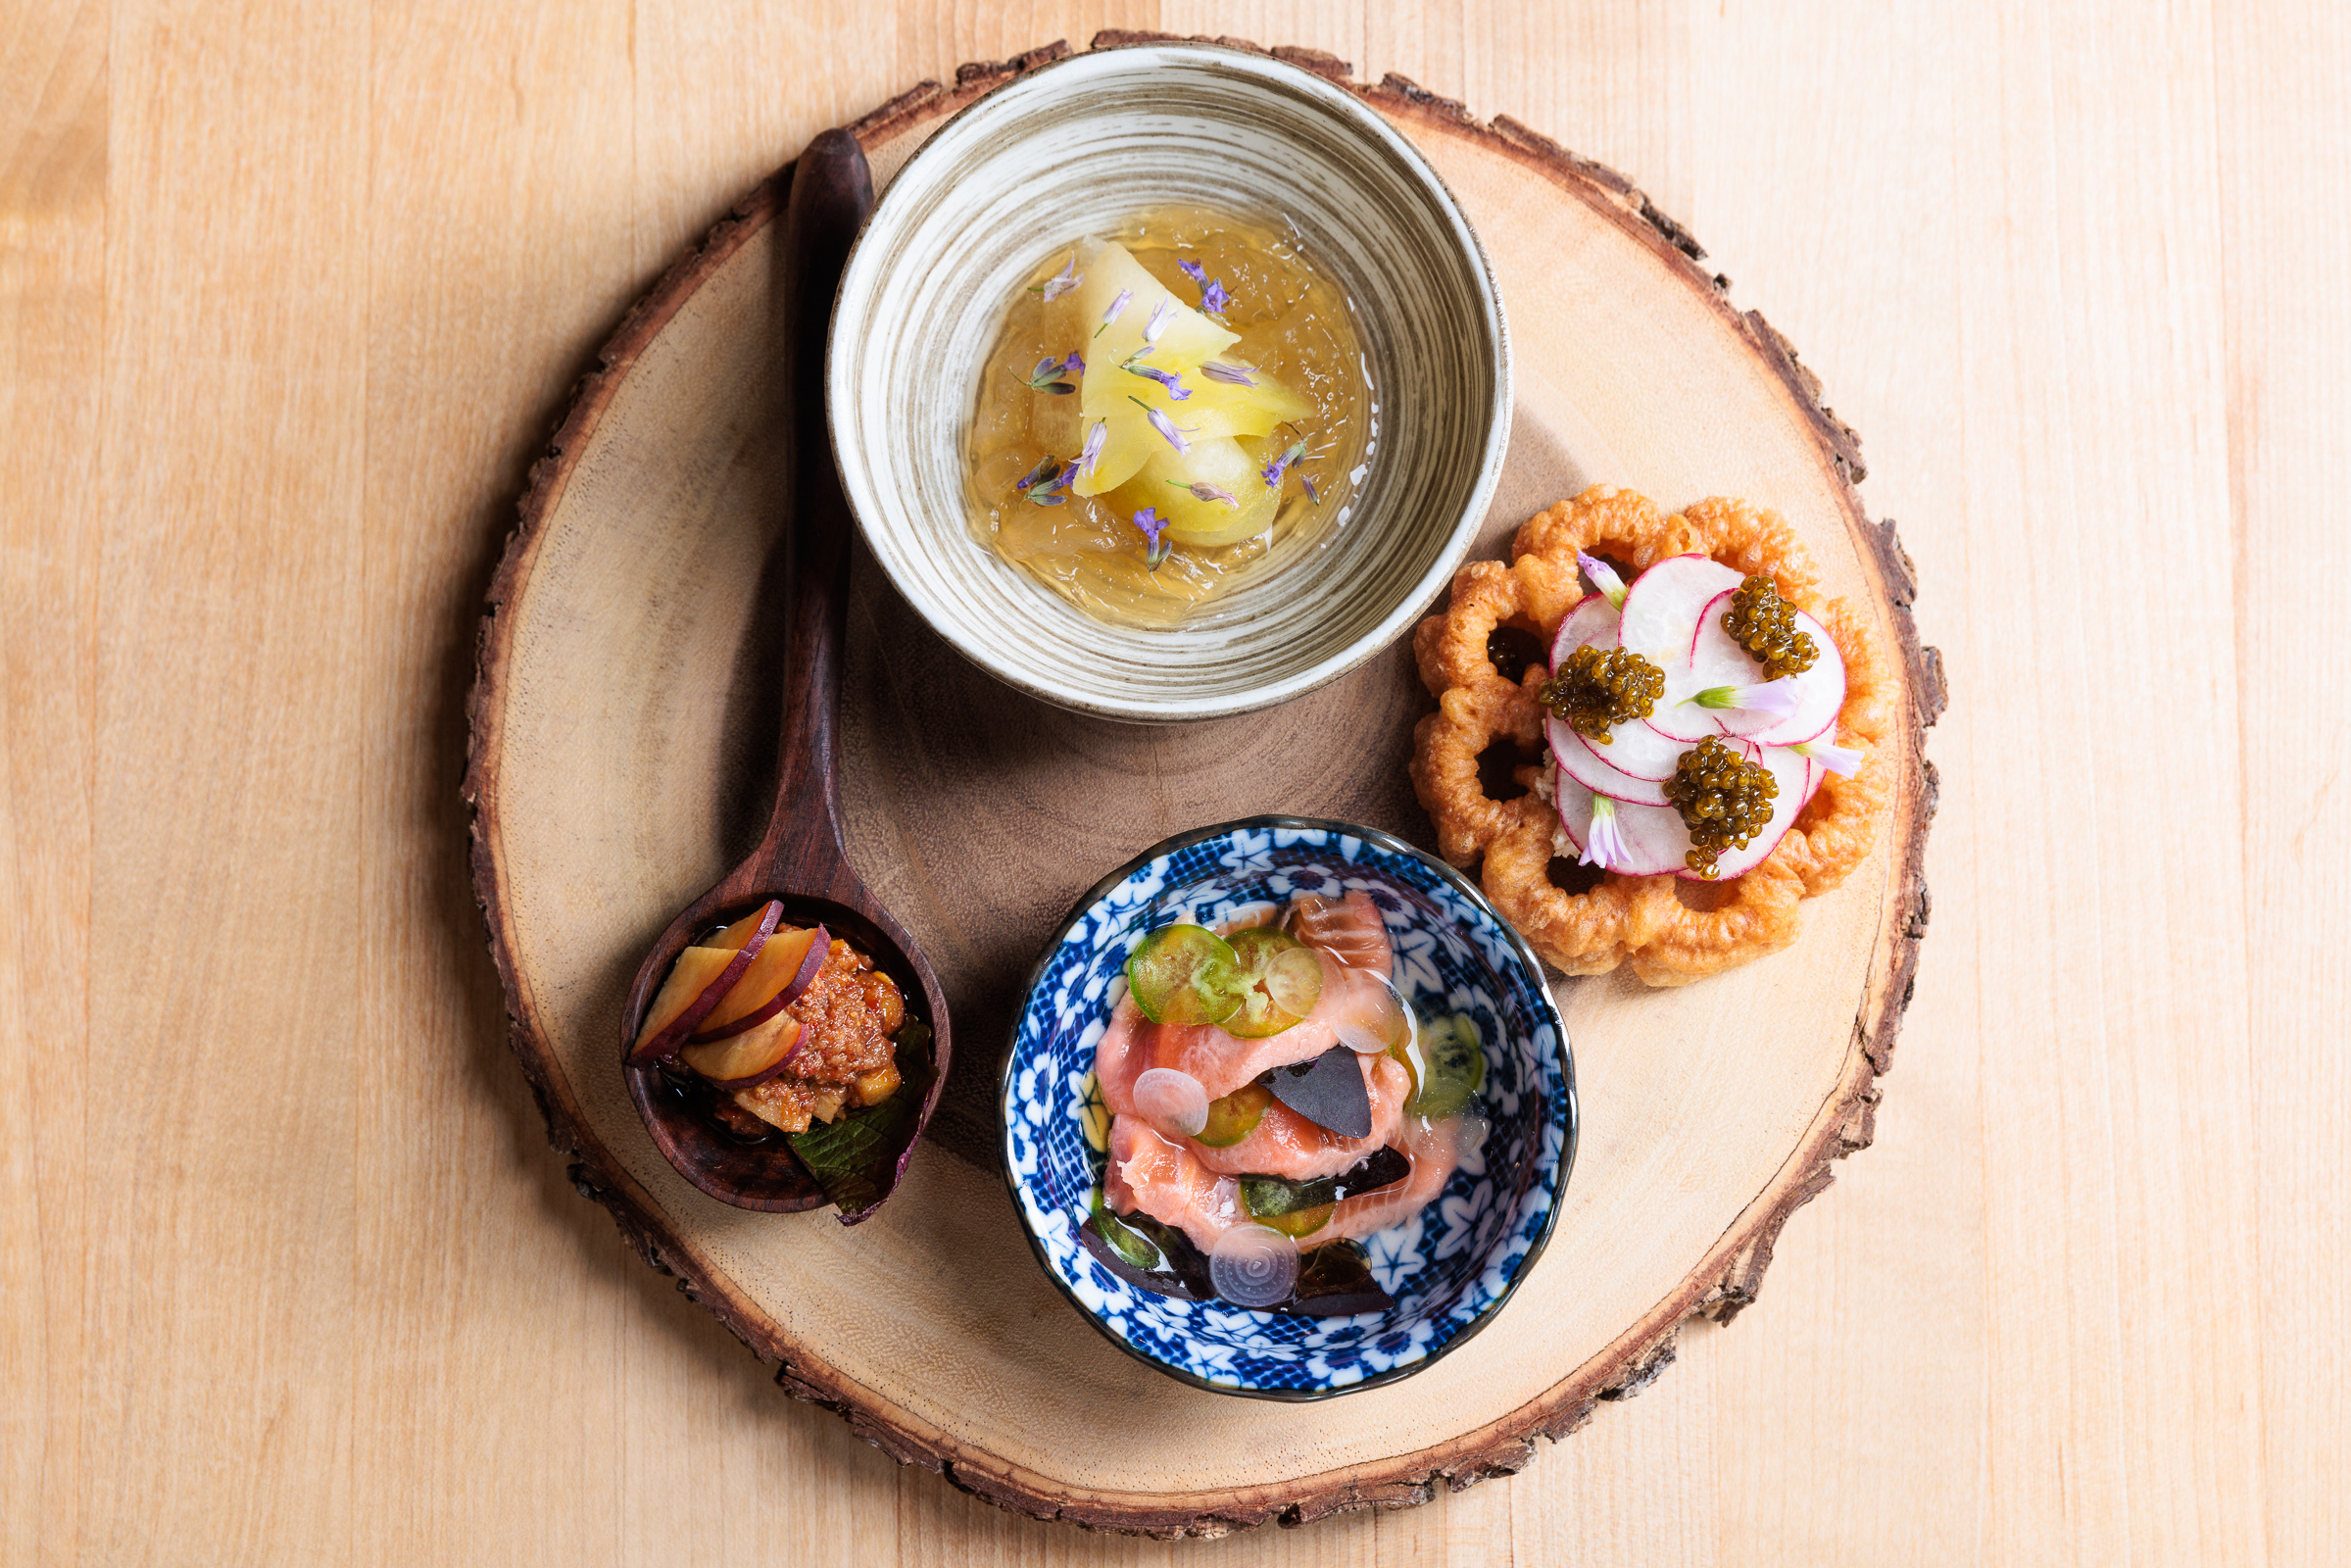 Pea gelee, rosettes with chickpea miso and butter, rainbow trout, and red fish ‘nduja all sit in separate ramekins on a round wooden platter